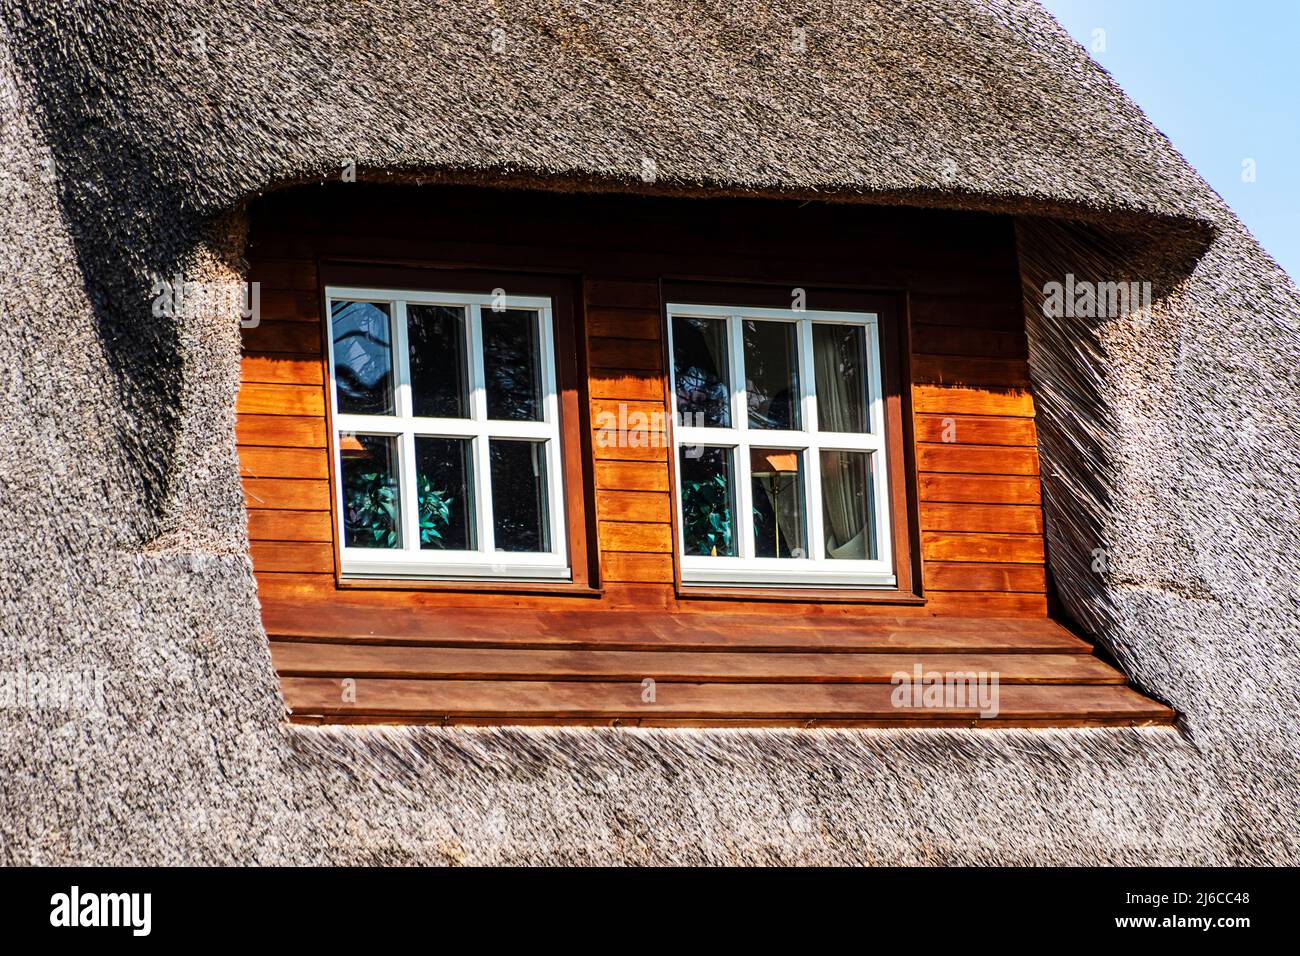 A traditional thatched roof house on the island of Sylt, North Frisian Islands, Germany Stock Photo